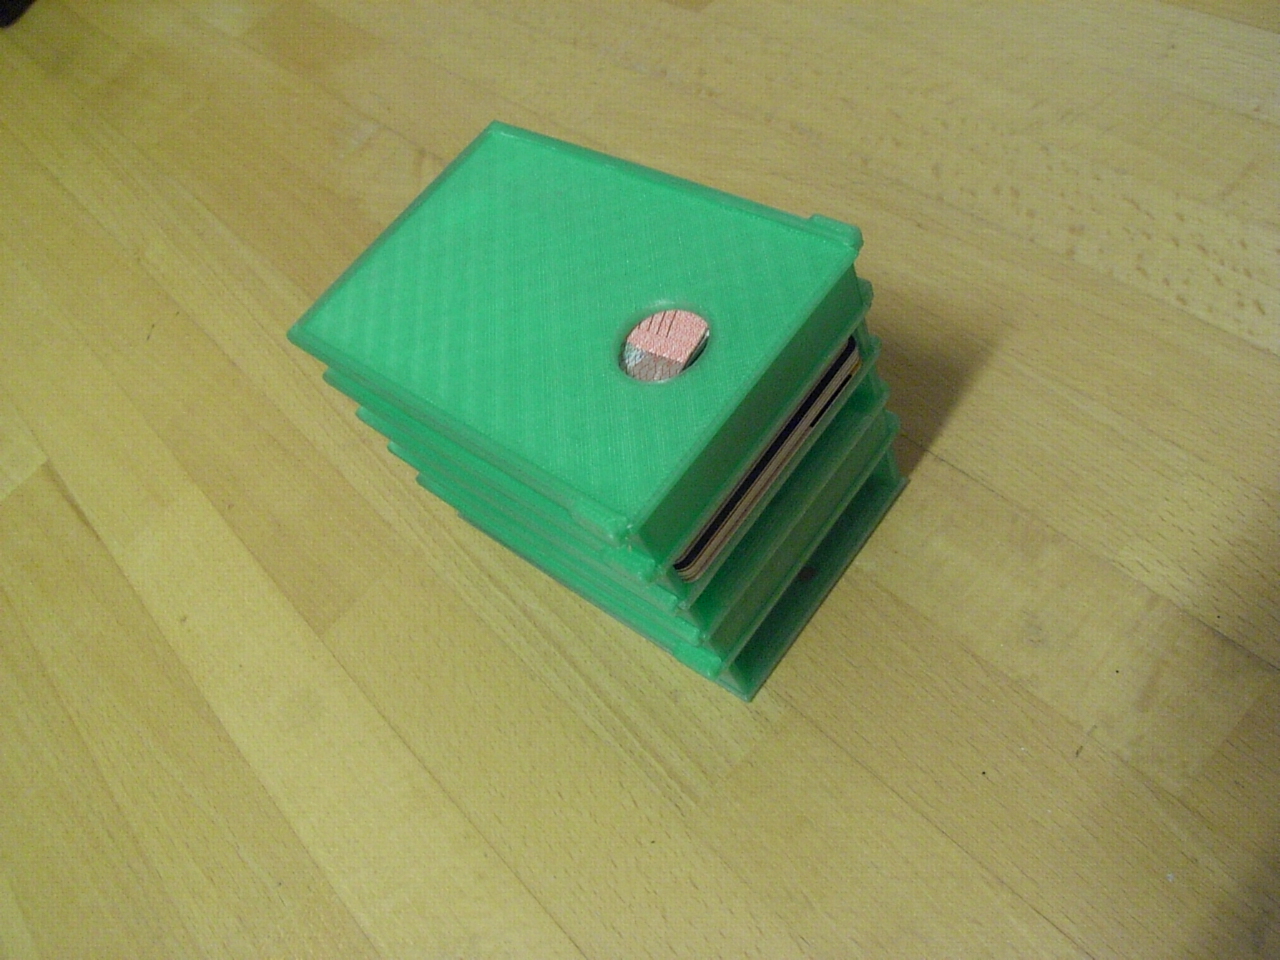 Stackable boxes for money, credit cards or anything imaginable